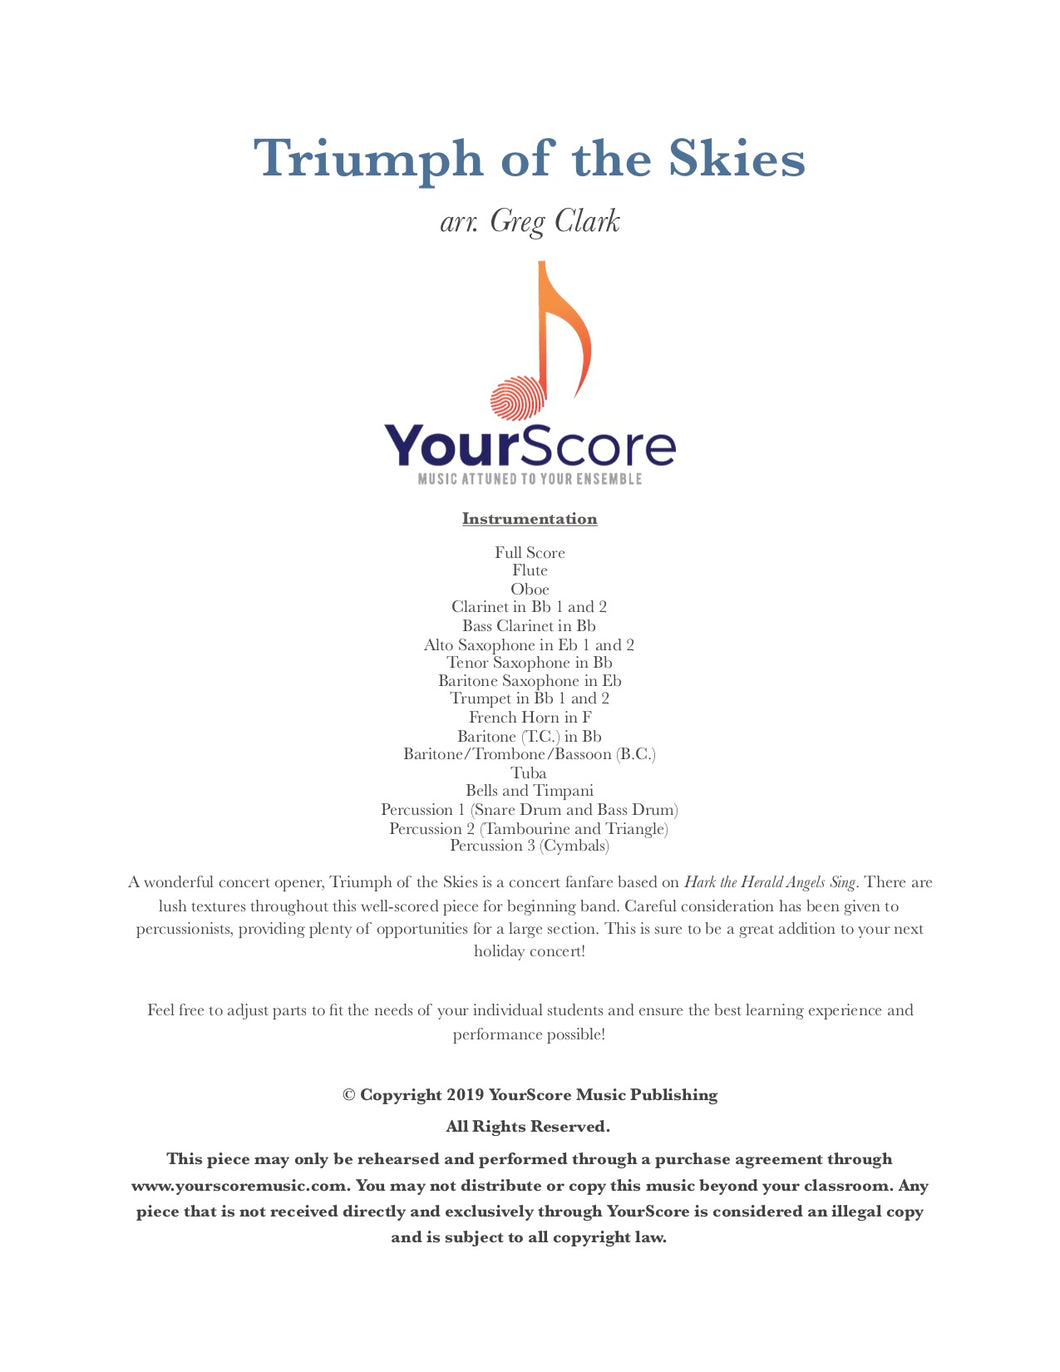 Cover of Triumph of the skies, a customizable and adaptable Middle School Band piece by Greg Clark